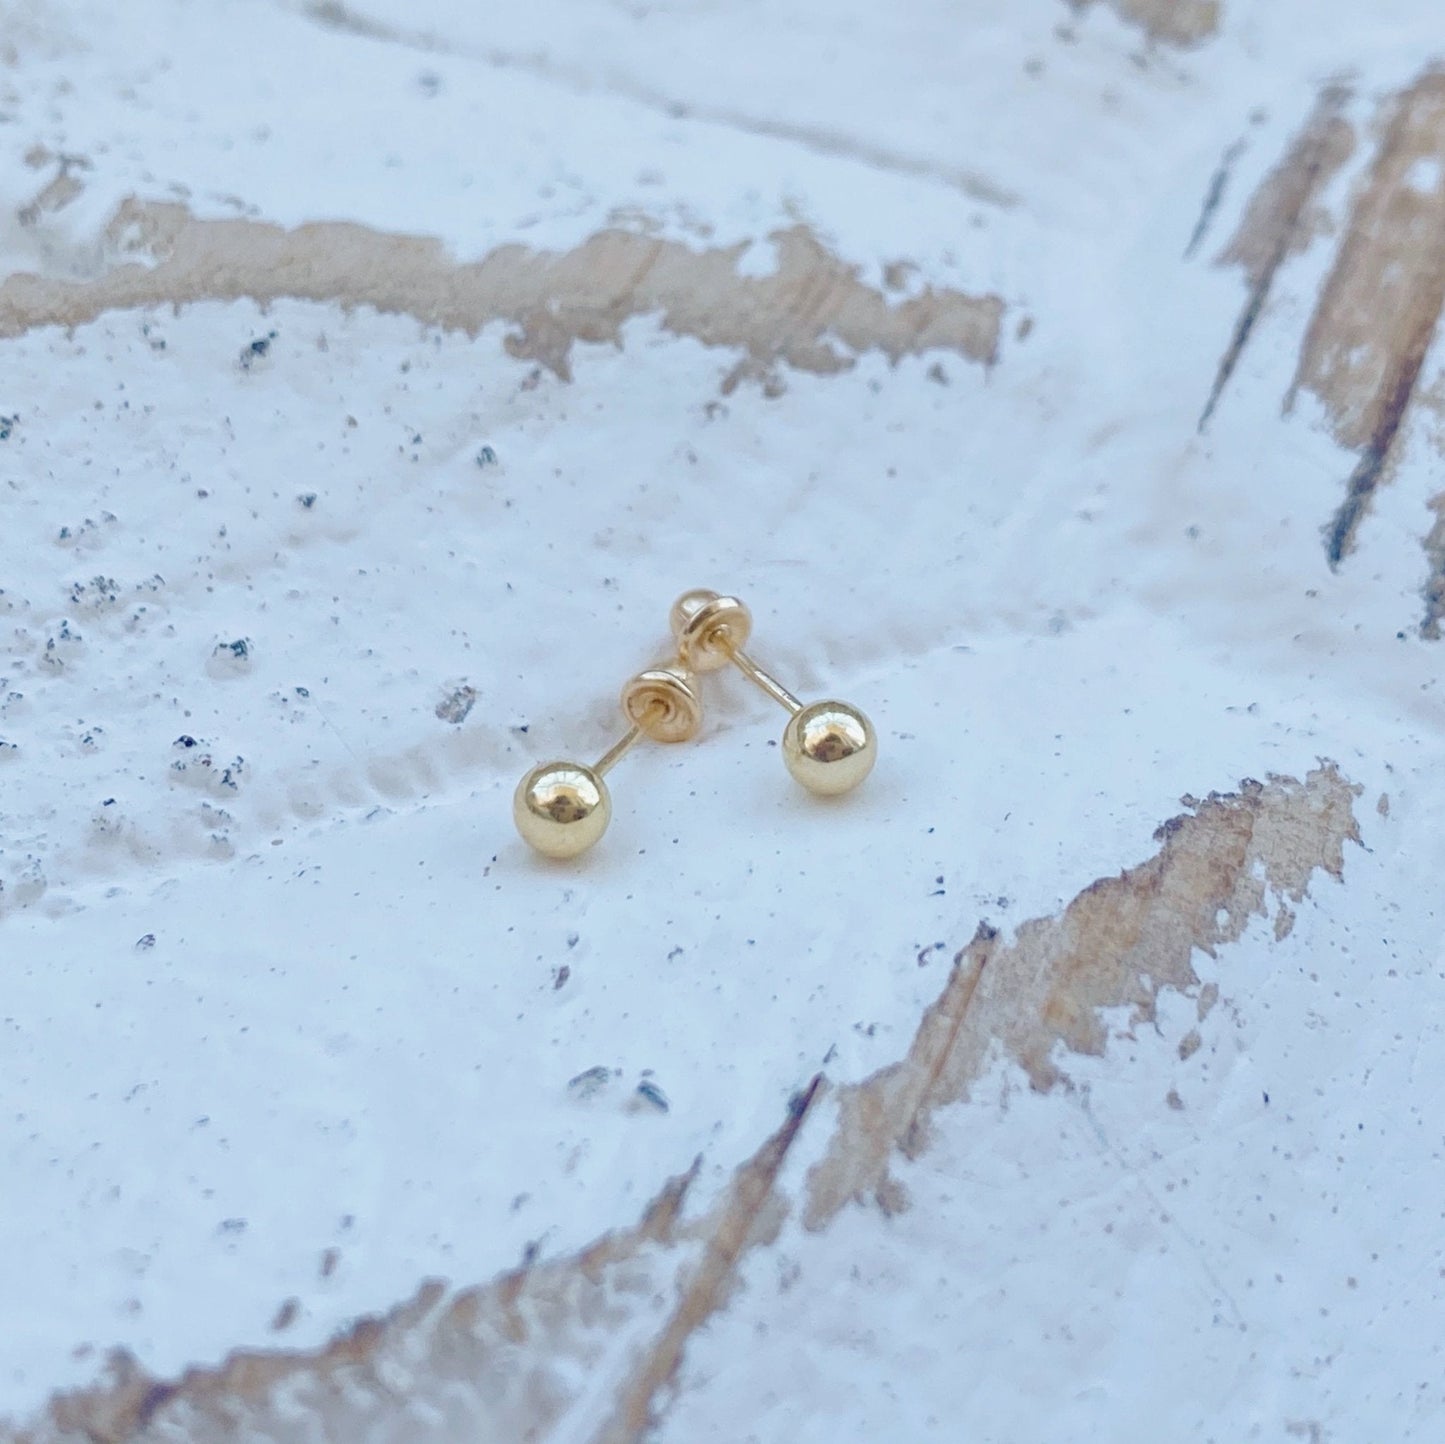 Load image into Gallery viewer, This is a pair of solid 10K gold earrings in gold disco ball shape. They are 2mm and 3mm, which can be adjusted to your preference. The perfect size for every day wear and has screw backs to avoid losing them while sleeping.
